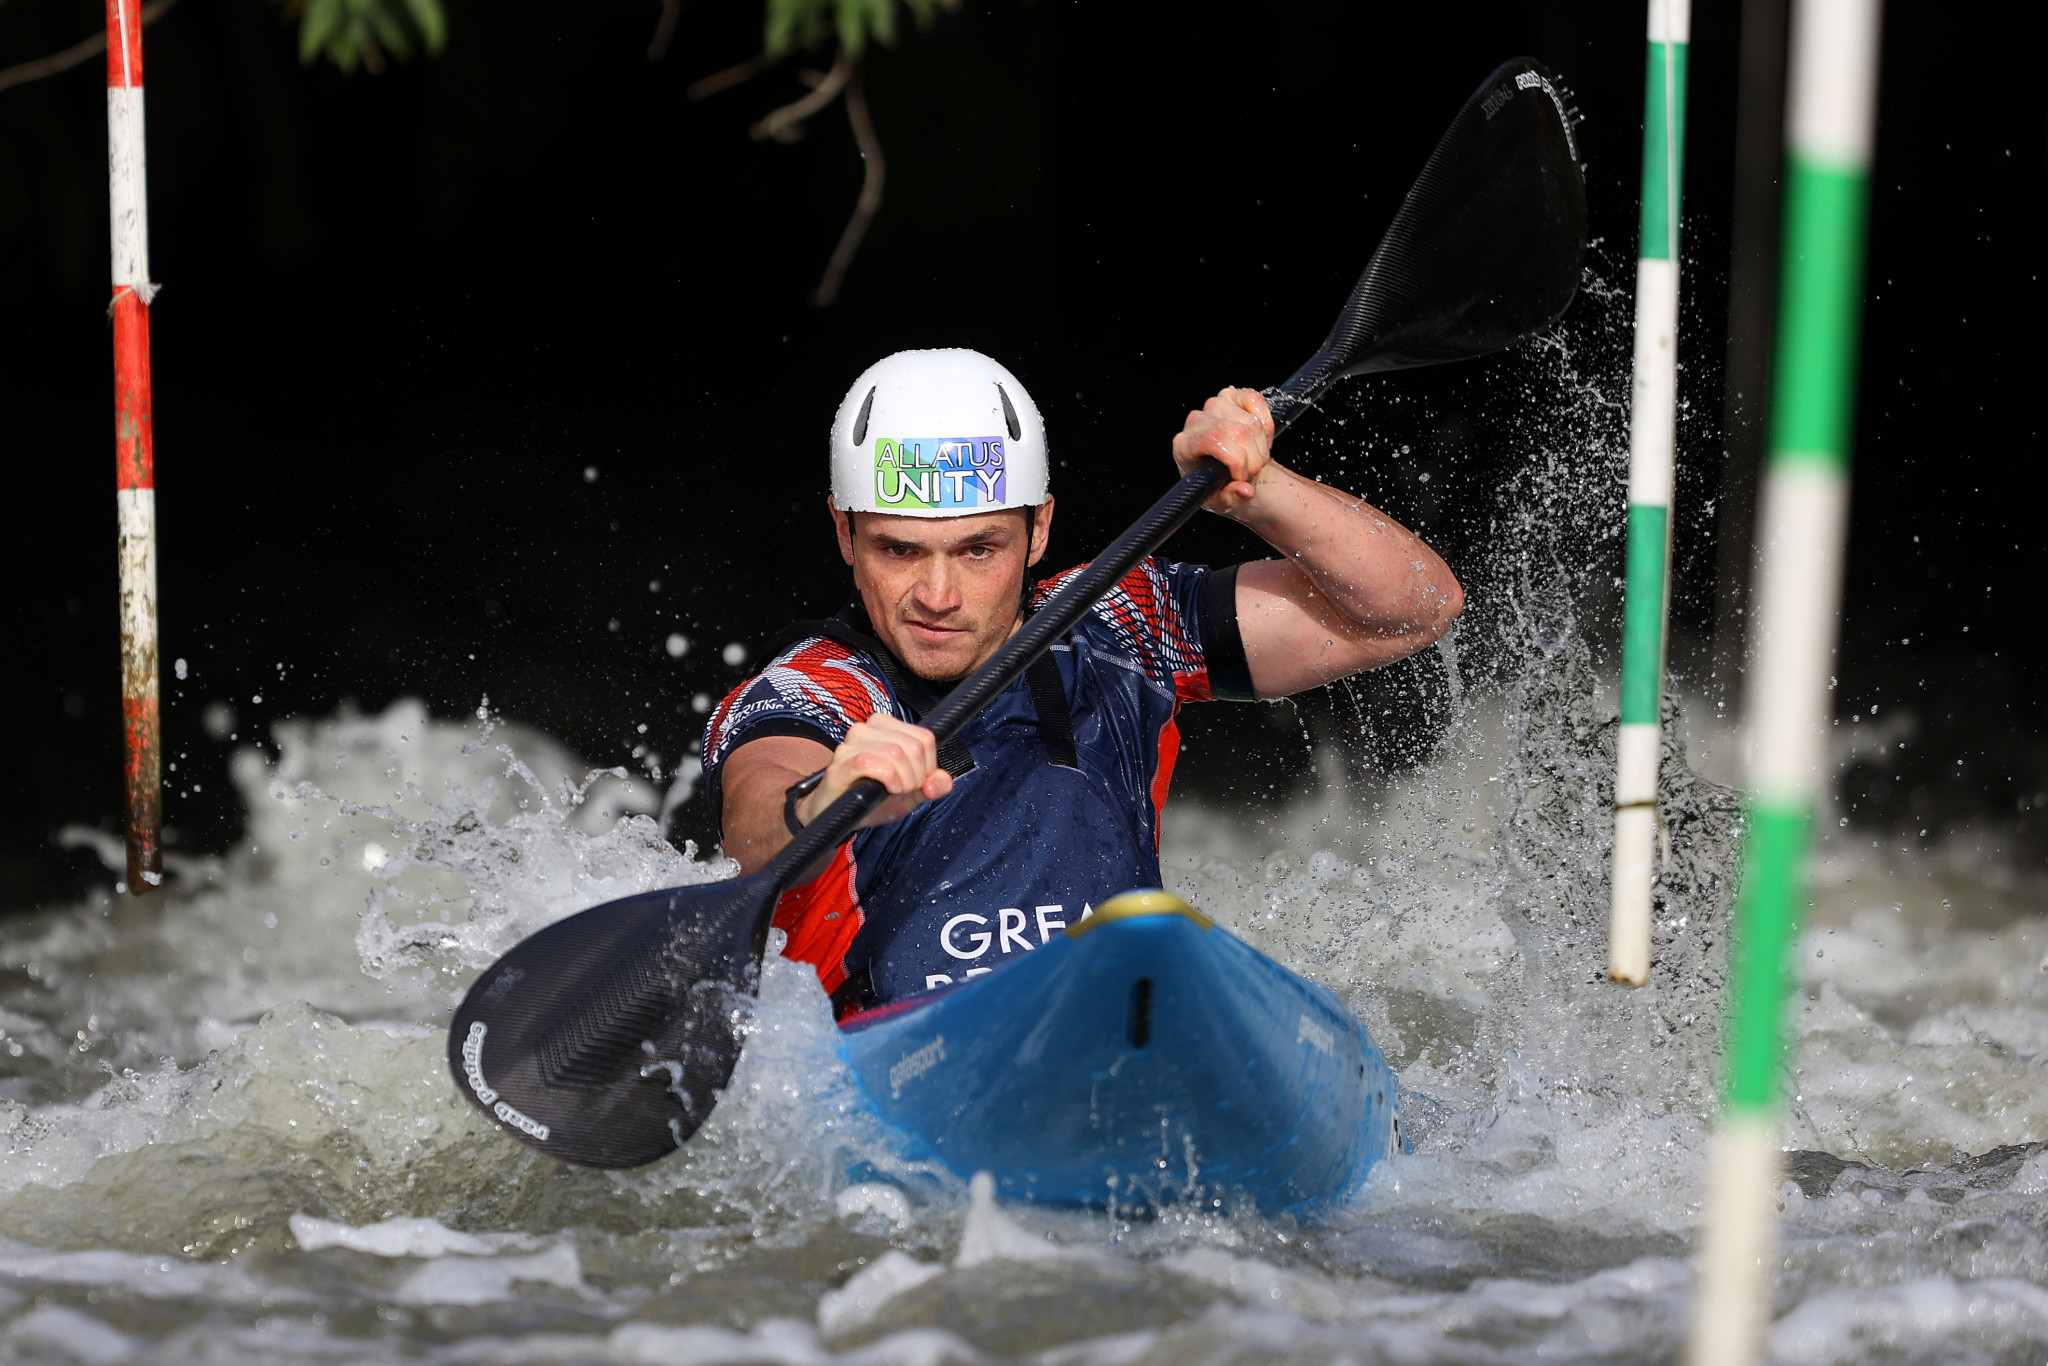 Bradley Forbes-Cryans claimed the men's K1 spot for Britain for Tokyo 2020 ©Getty Images